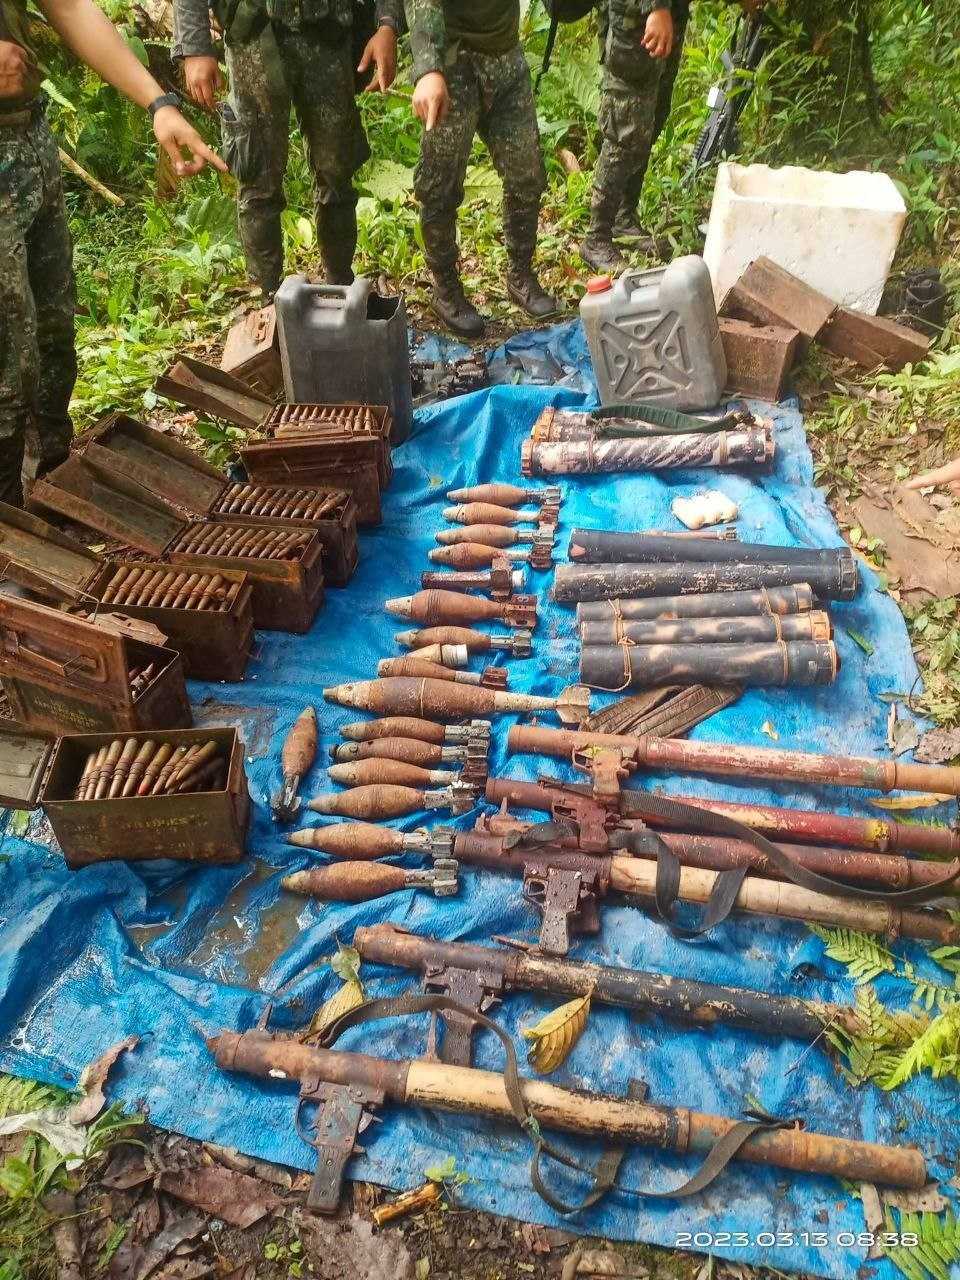 The AFP seizes firearms like grenade launchers, ammunition, and explosives during a combat clearing operation in Maguindanao del Norte